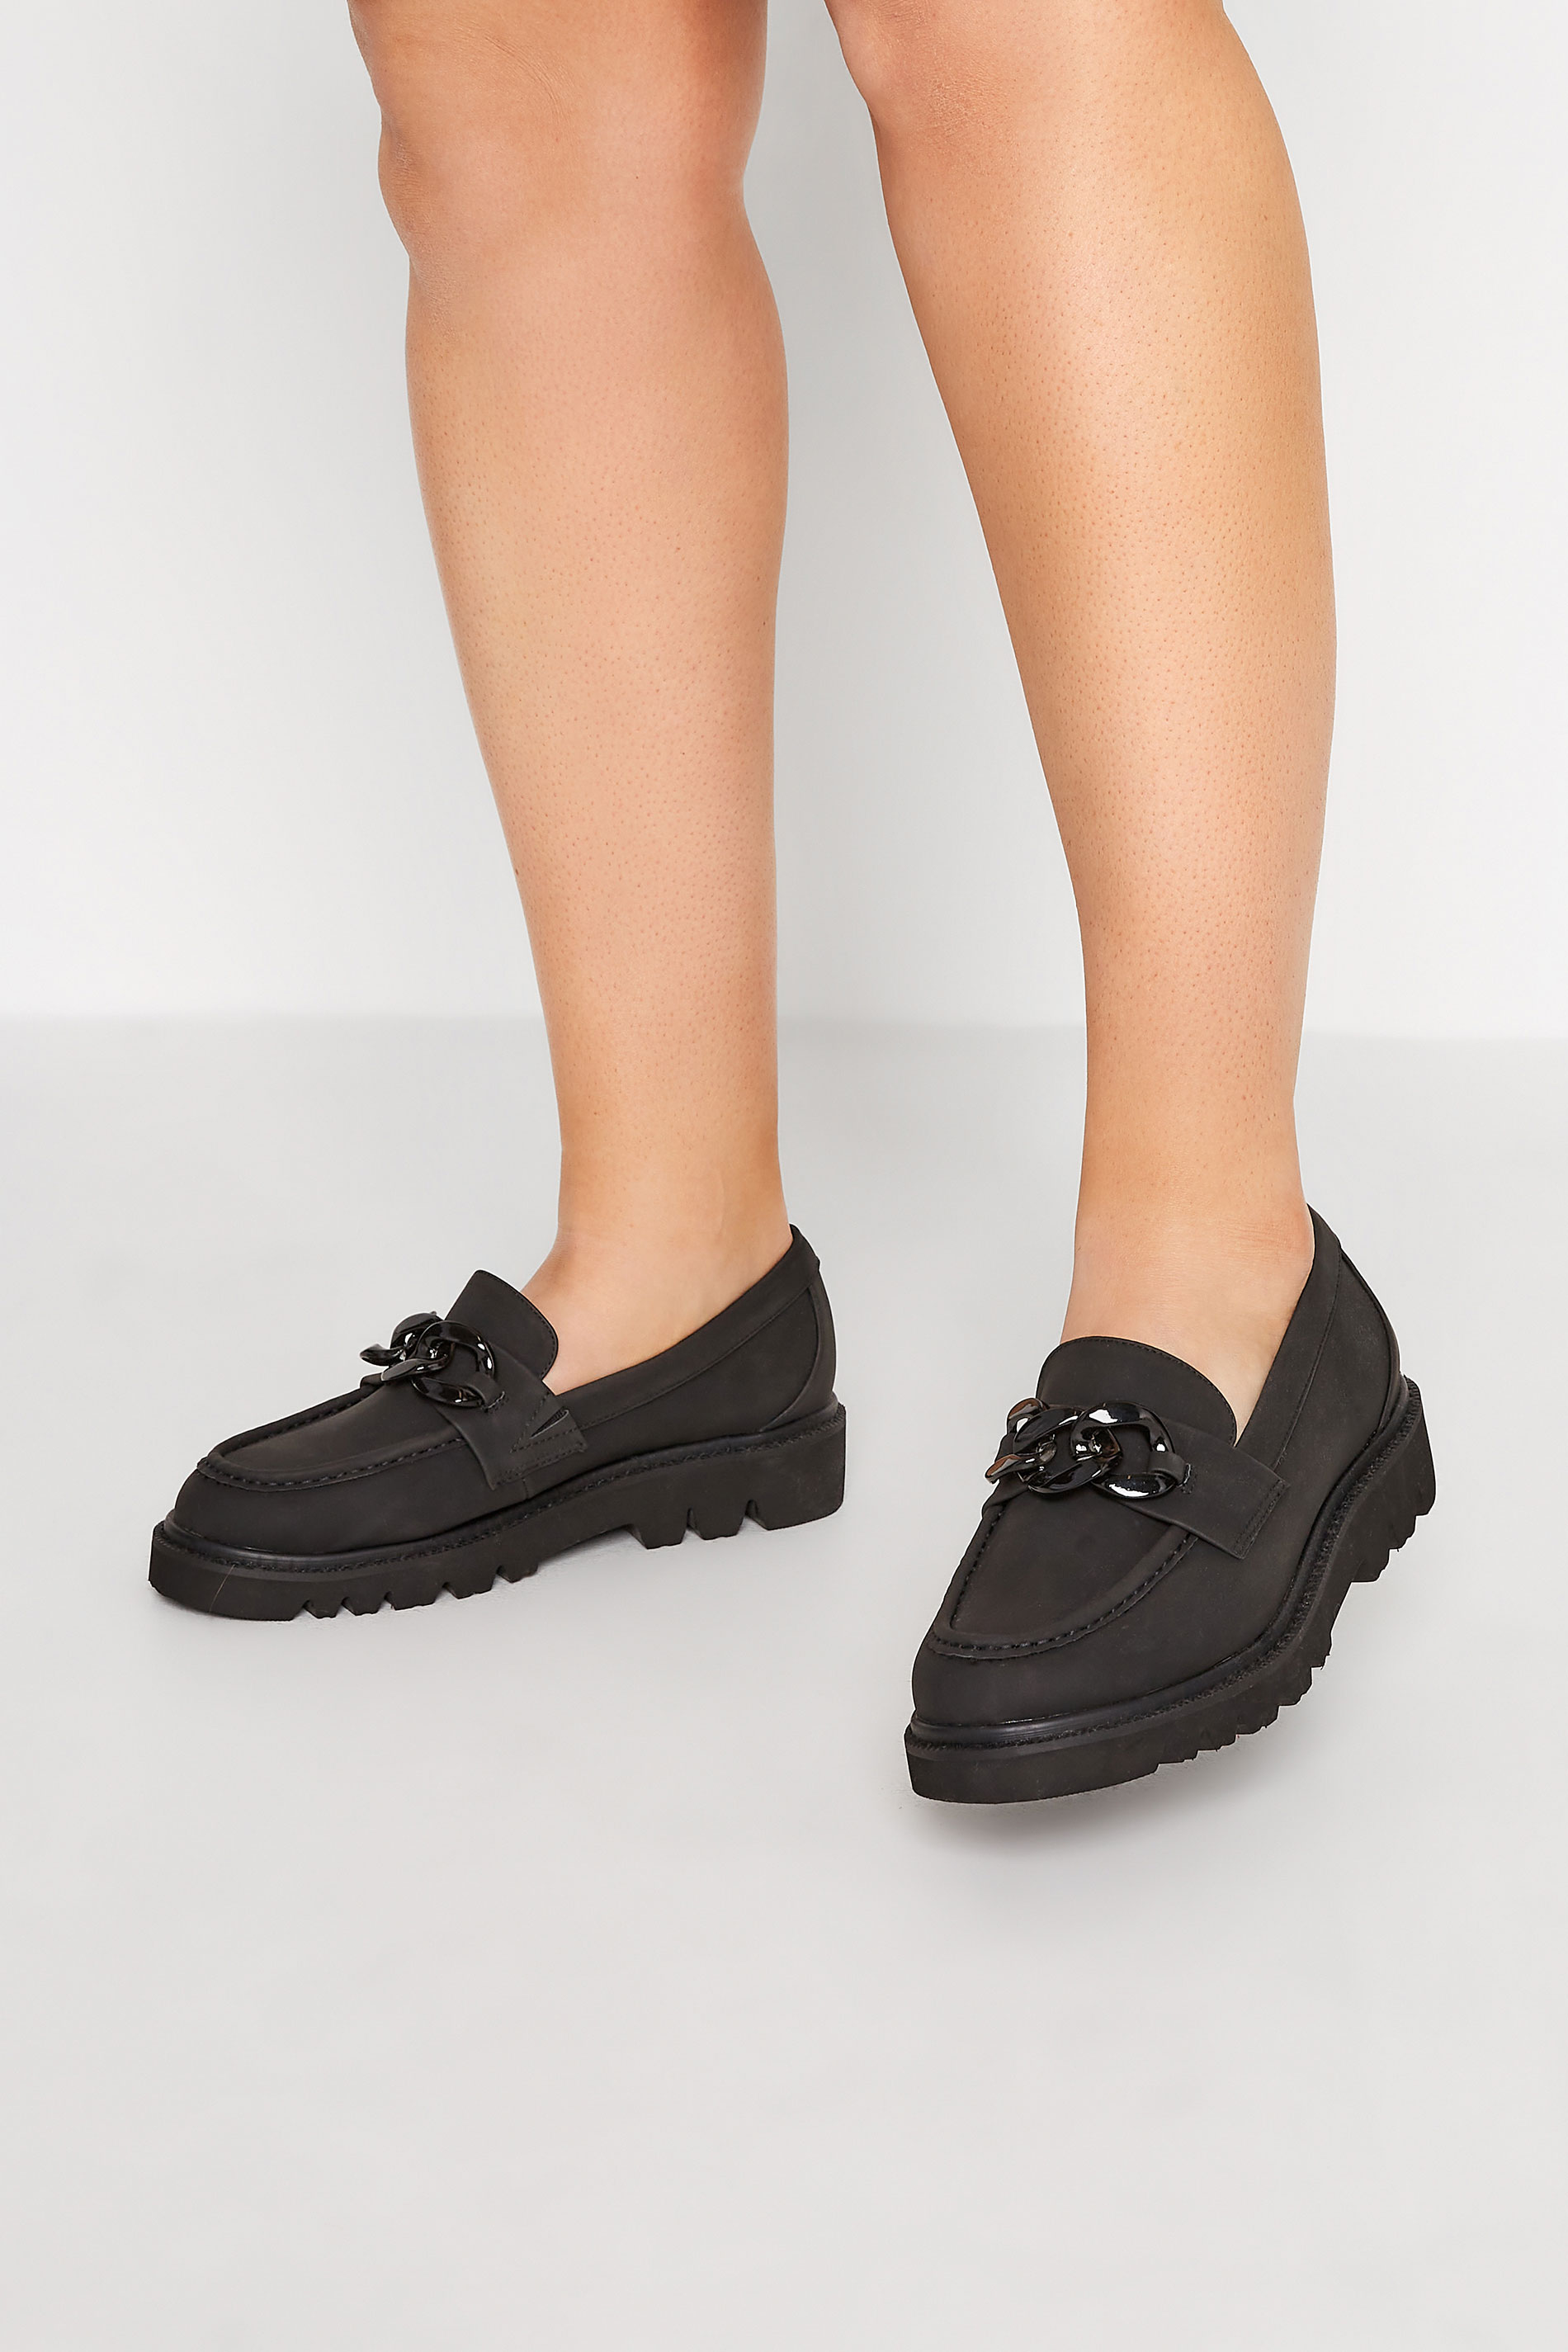 LIMITED COLLECTION Plus Size Black Chunky Chain Loafers In Extra Wide EEE Fit | Yours Clothing 1